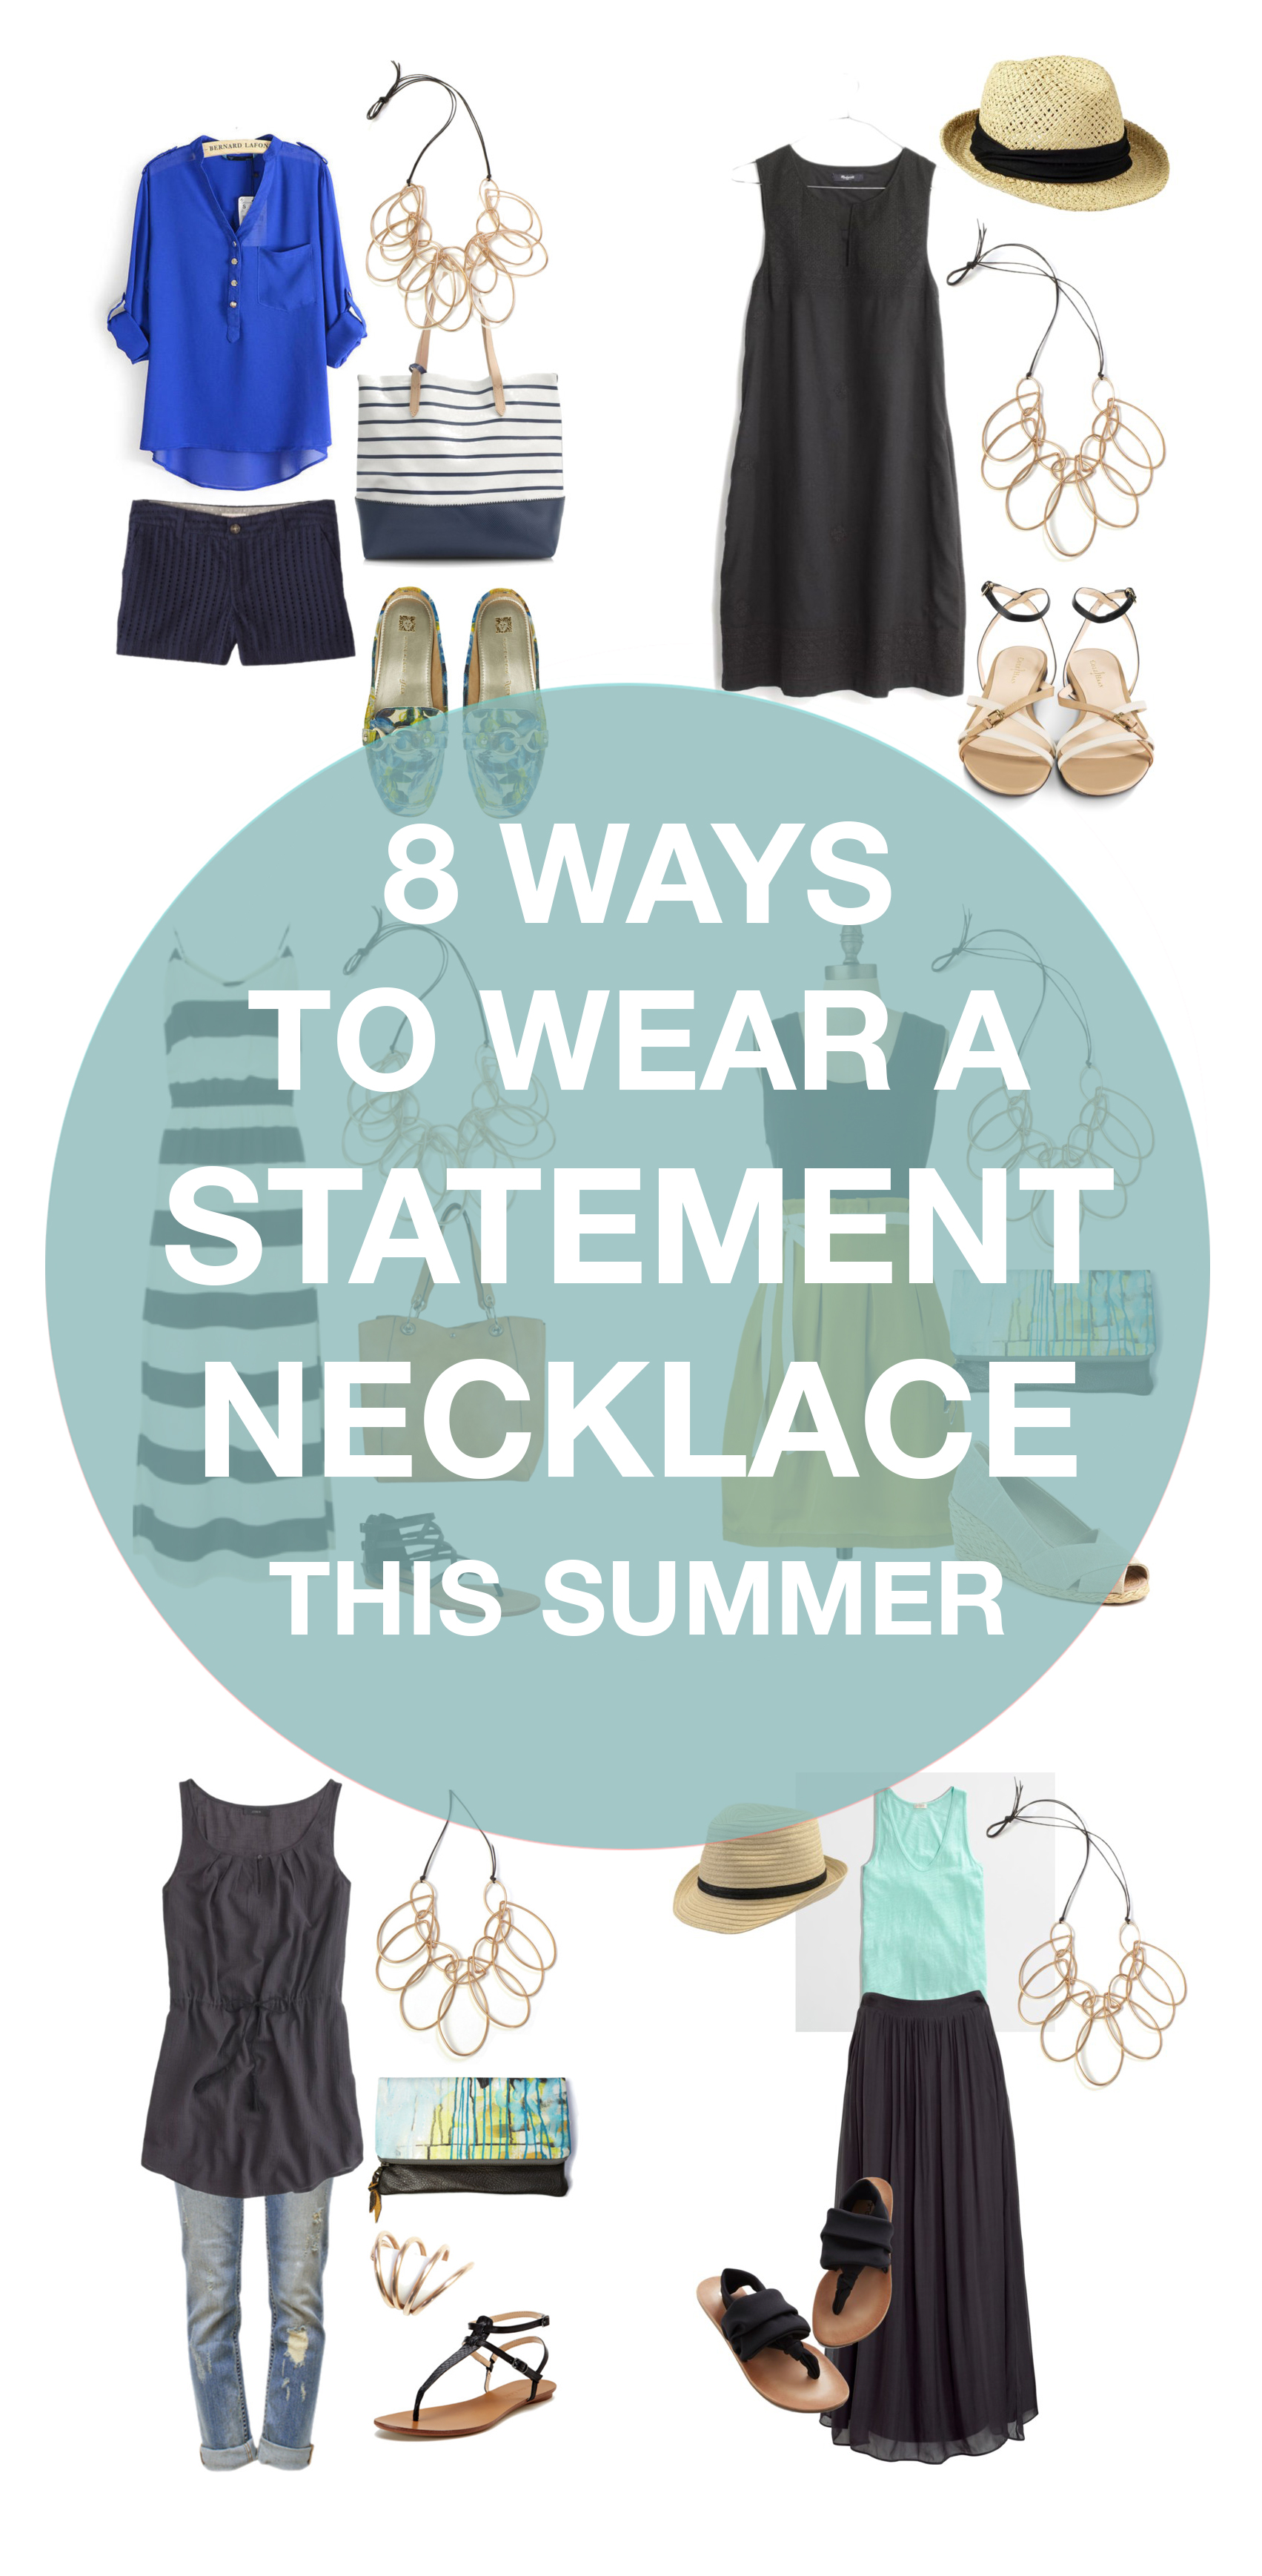 how to wear a statement necklace in summer: 8 outfit ideas to try // via megan auman